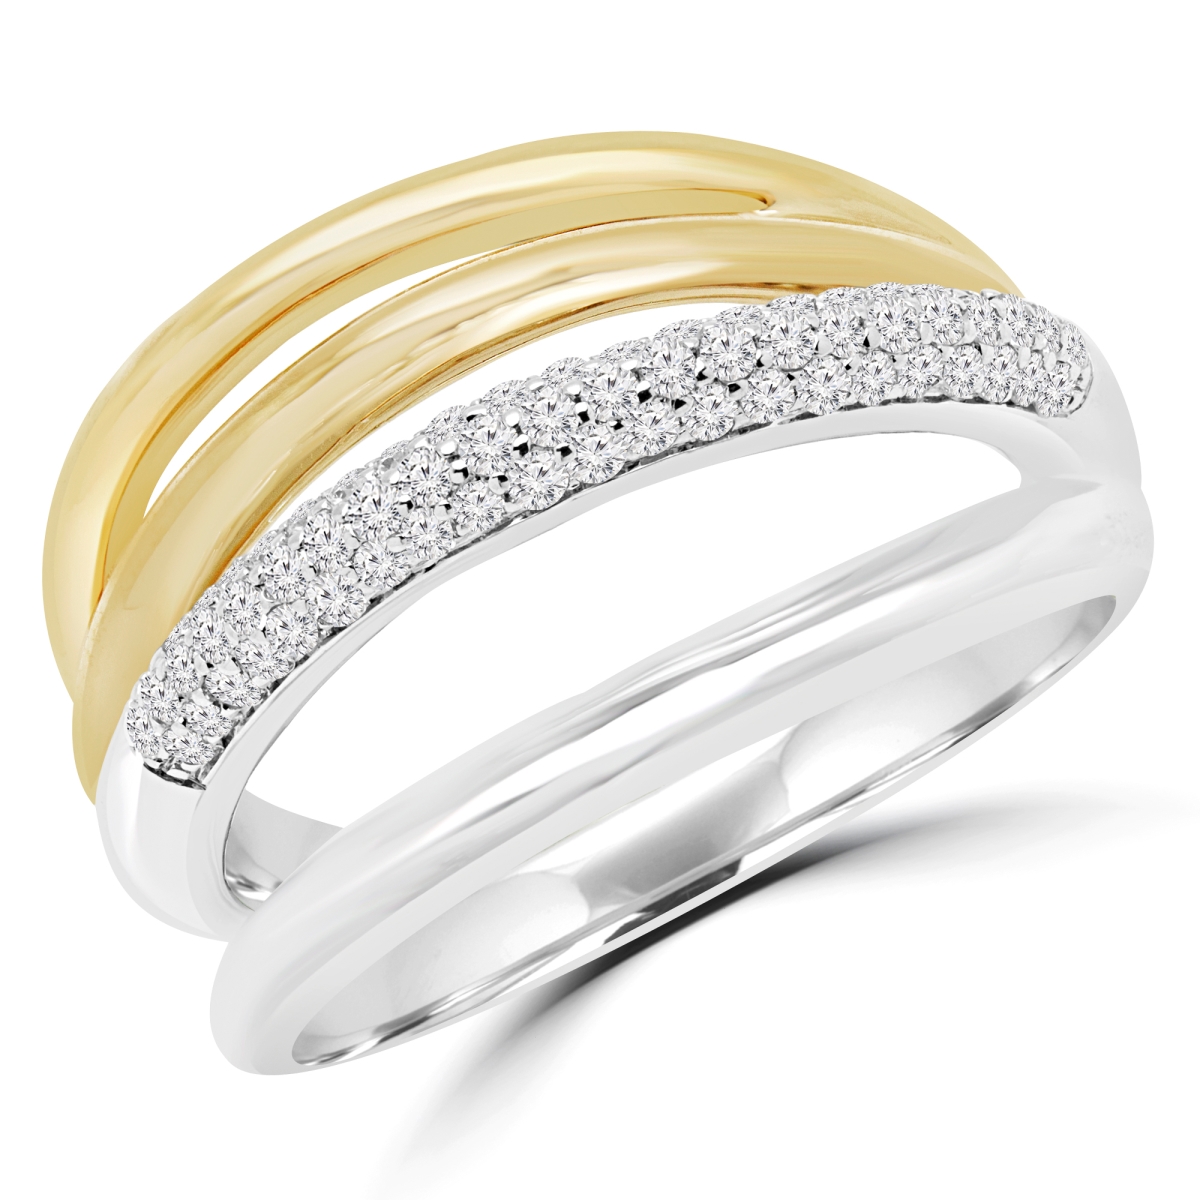 Picture of Majesty Diamonds MDR170050-3 0.37 CTW Round Diamond Cocktail Semi-Eternity Ring in 14K Two-Tone Gold - 3